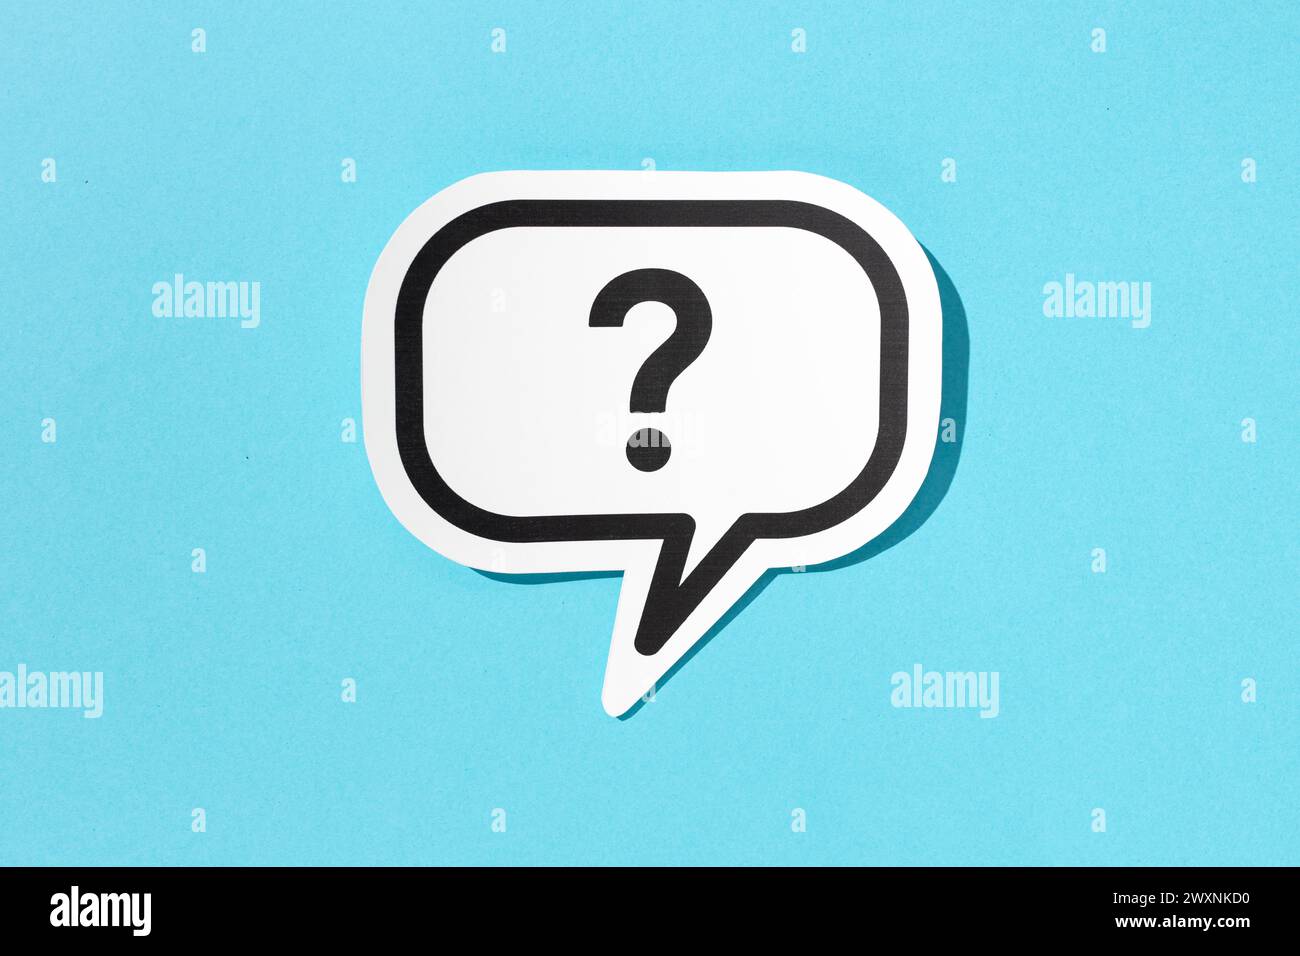 Question mark on speech bubble isolated on blue background. Doubt, confusion, uncertainty concept Stock Photo